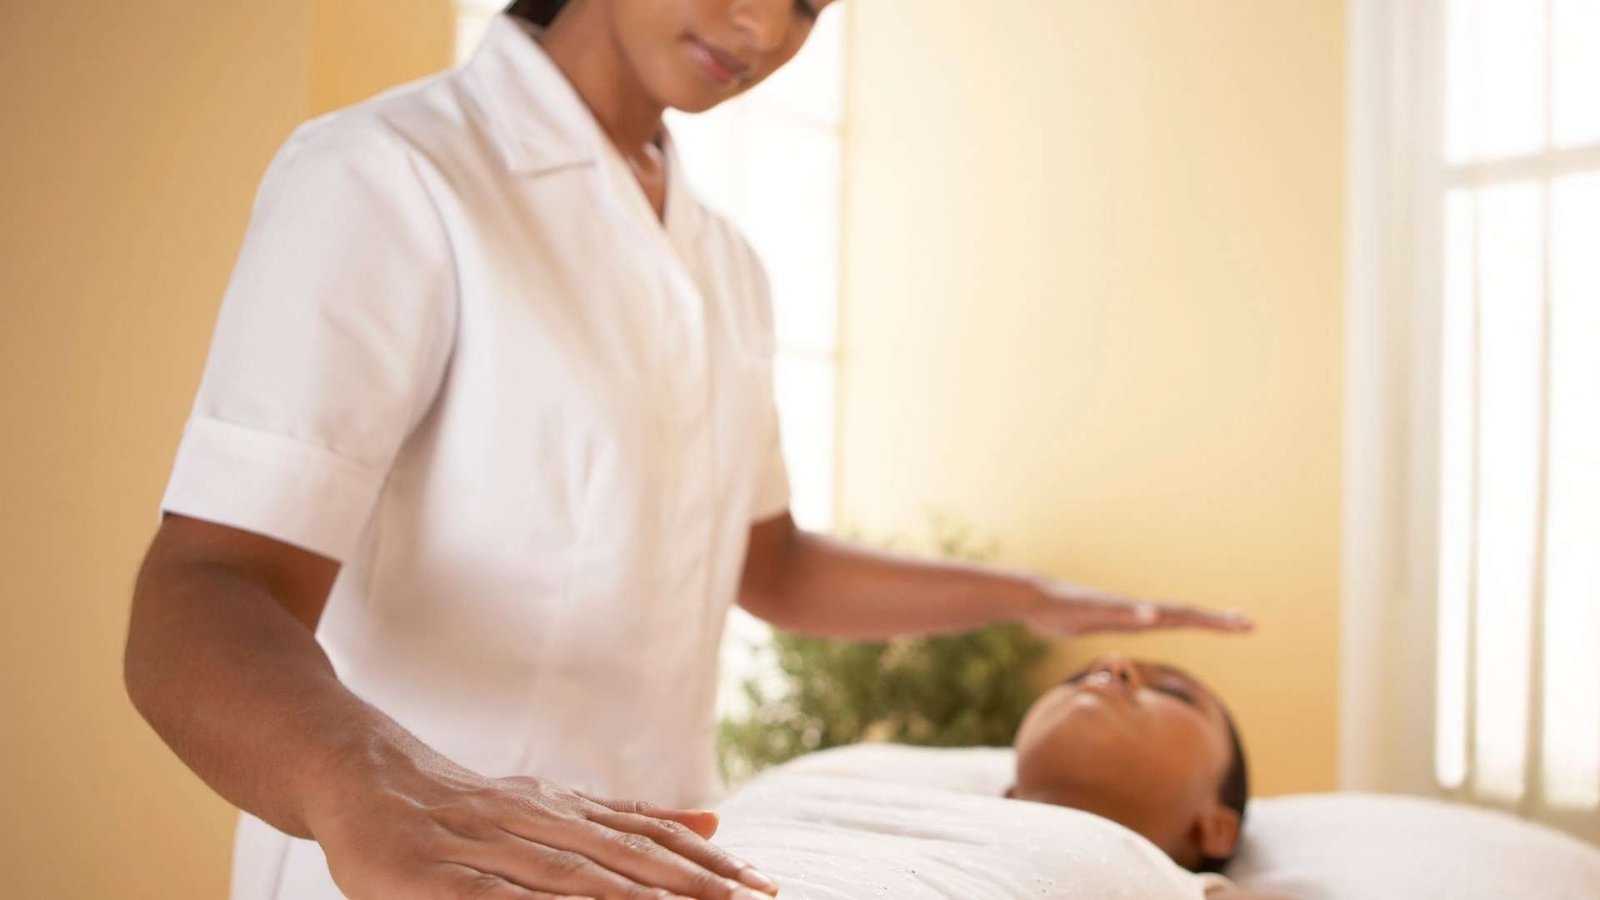 We Asked our Members: What do you like most about being a Reiki & Wellness Practitioner?